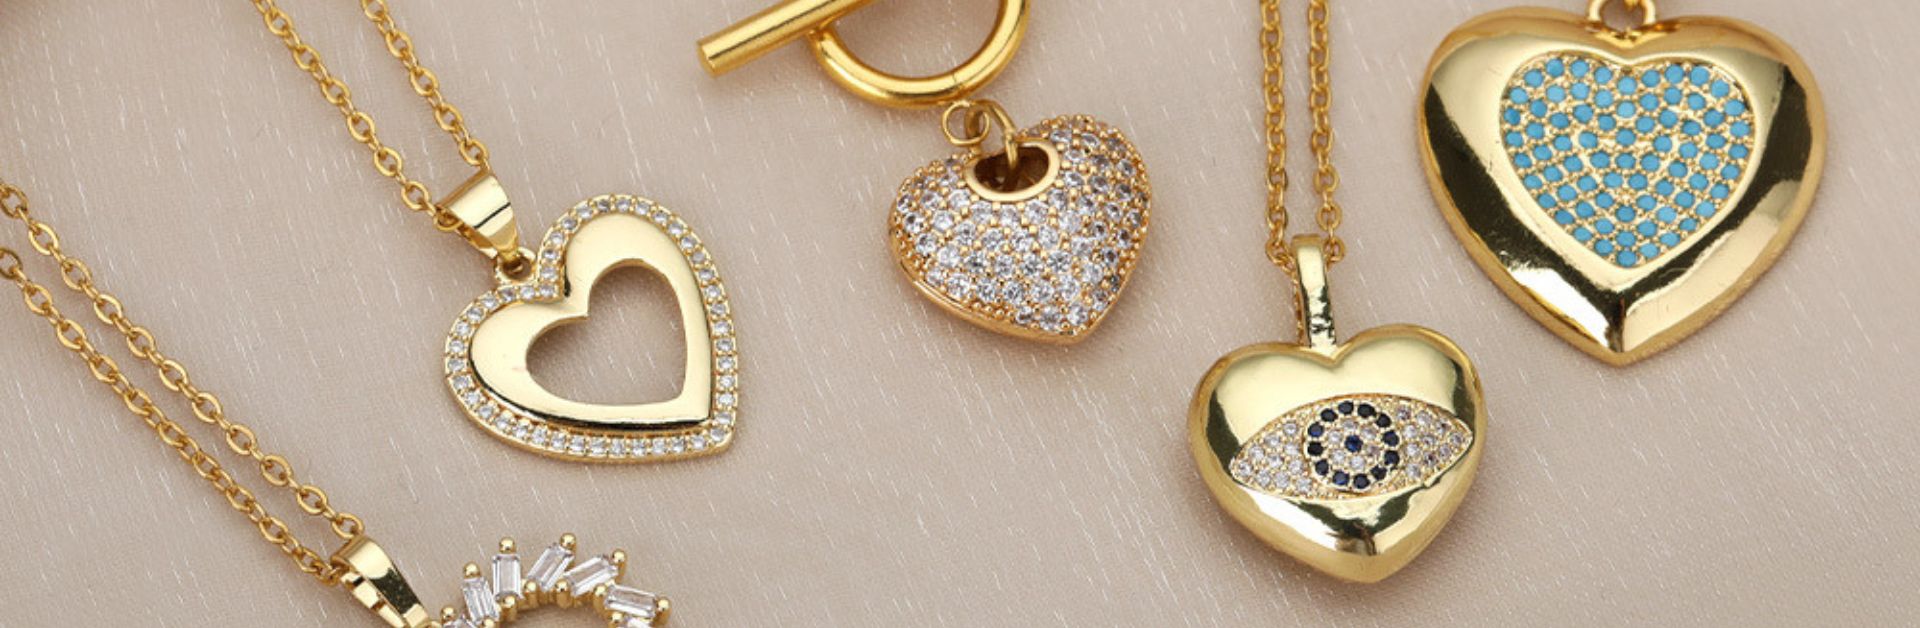 Hottest jewelry picks from Kandere collection